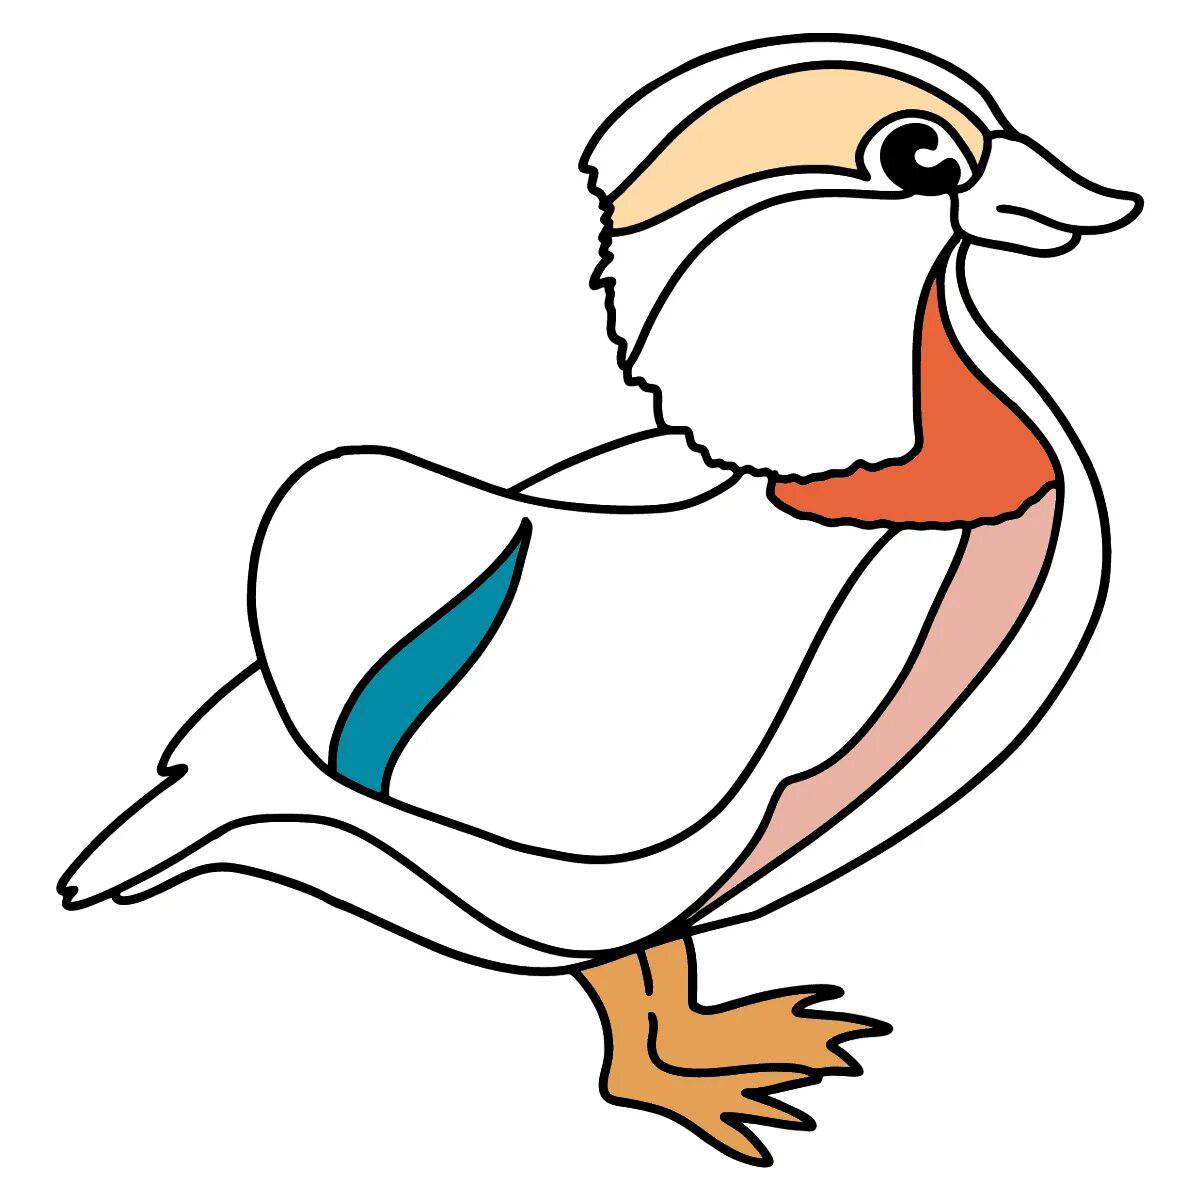 Outstanding mandarin duck coloring page for kids